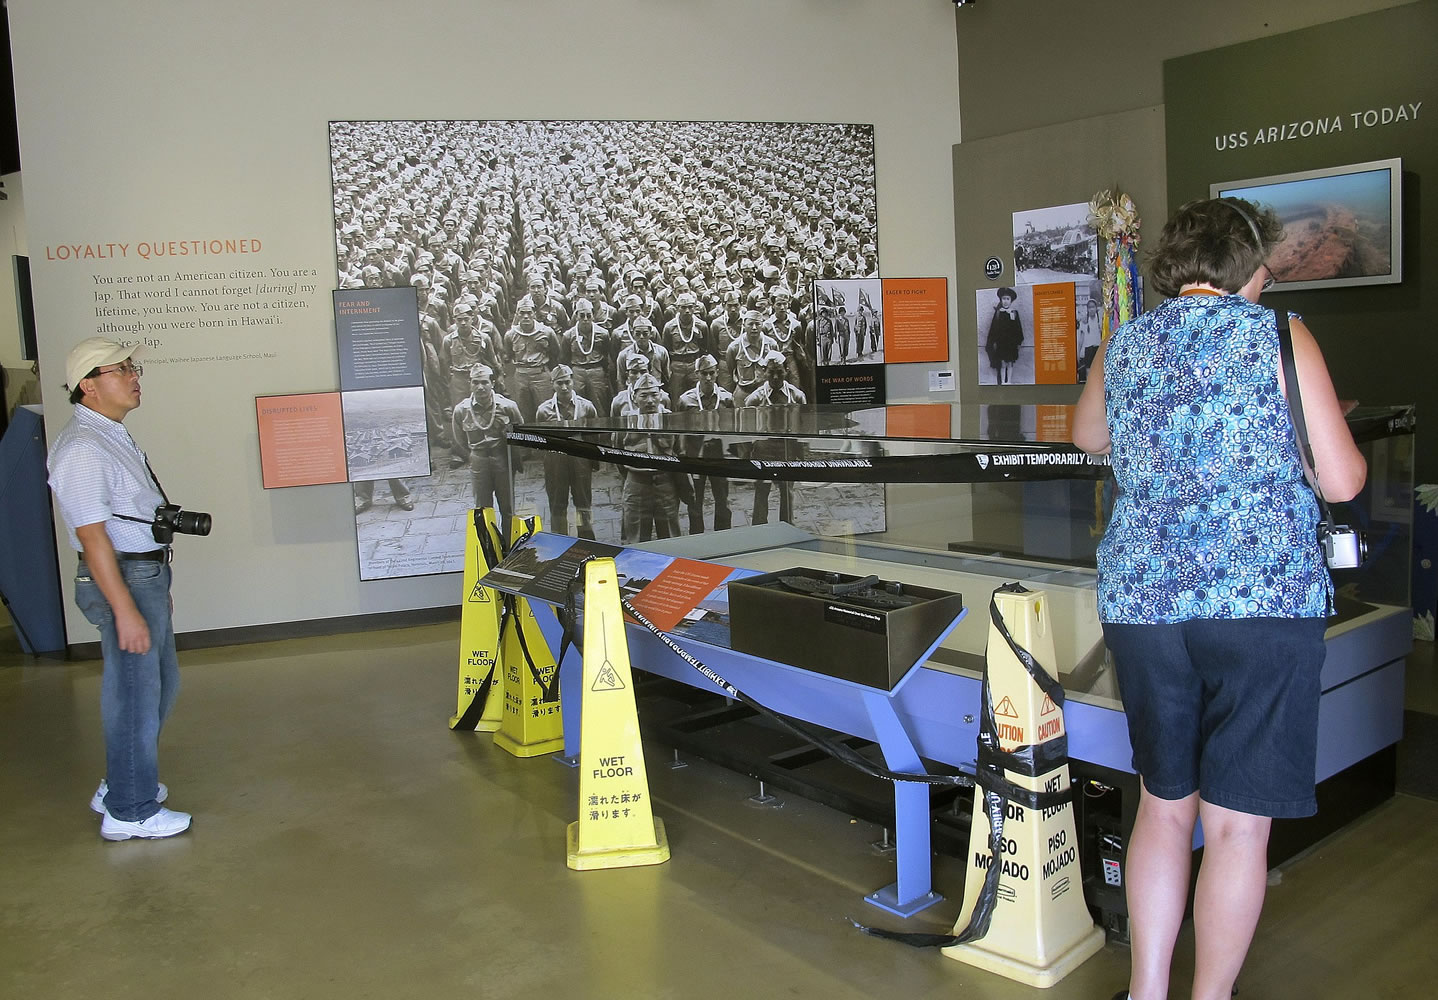 Visitors look at a glass exhibit case that has been empty for a year at the visitor's center for the USS Arizona Memorial in Pearl Harbor, Hawaii.